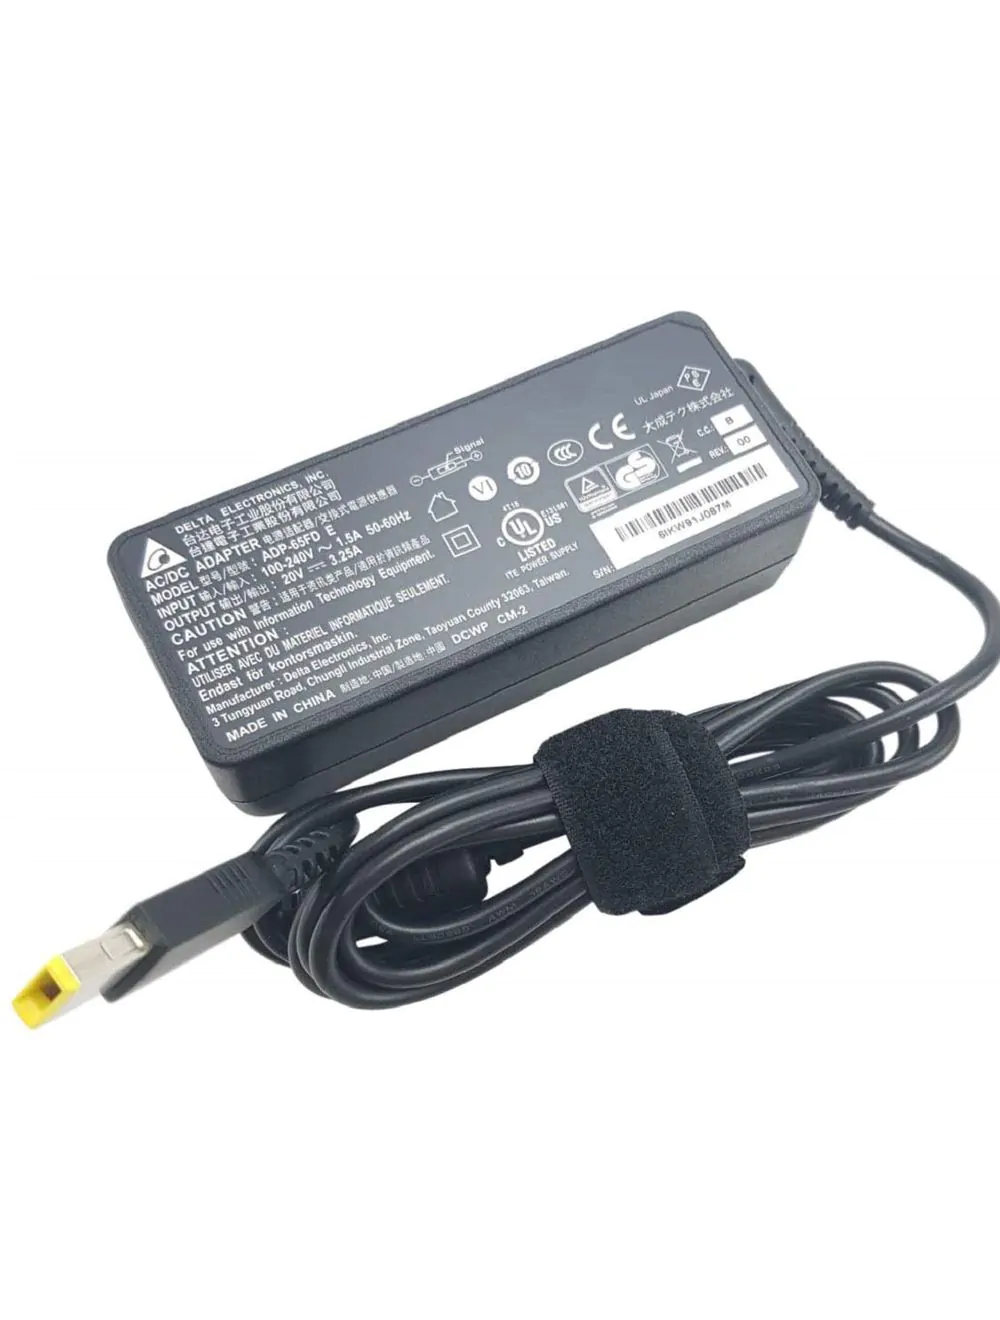 Lenovo 888015000 65W Laptop Adapter/Charger with Power Cord for Select  Models of Lenovo (Slim Tip Rectangular pin)